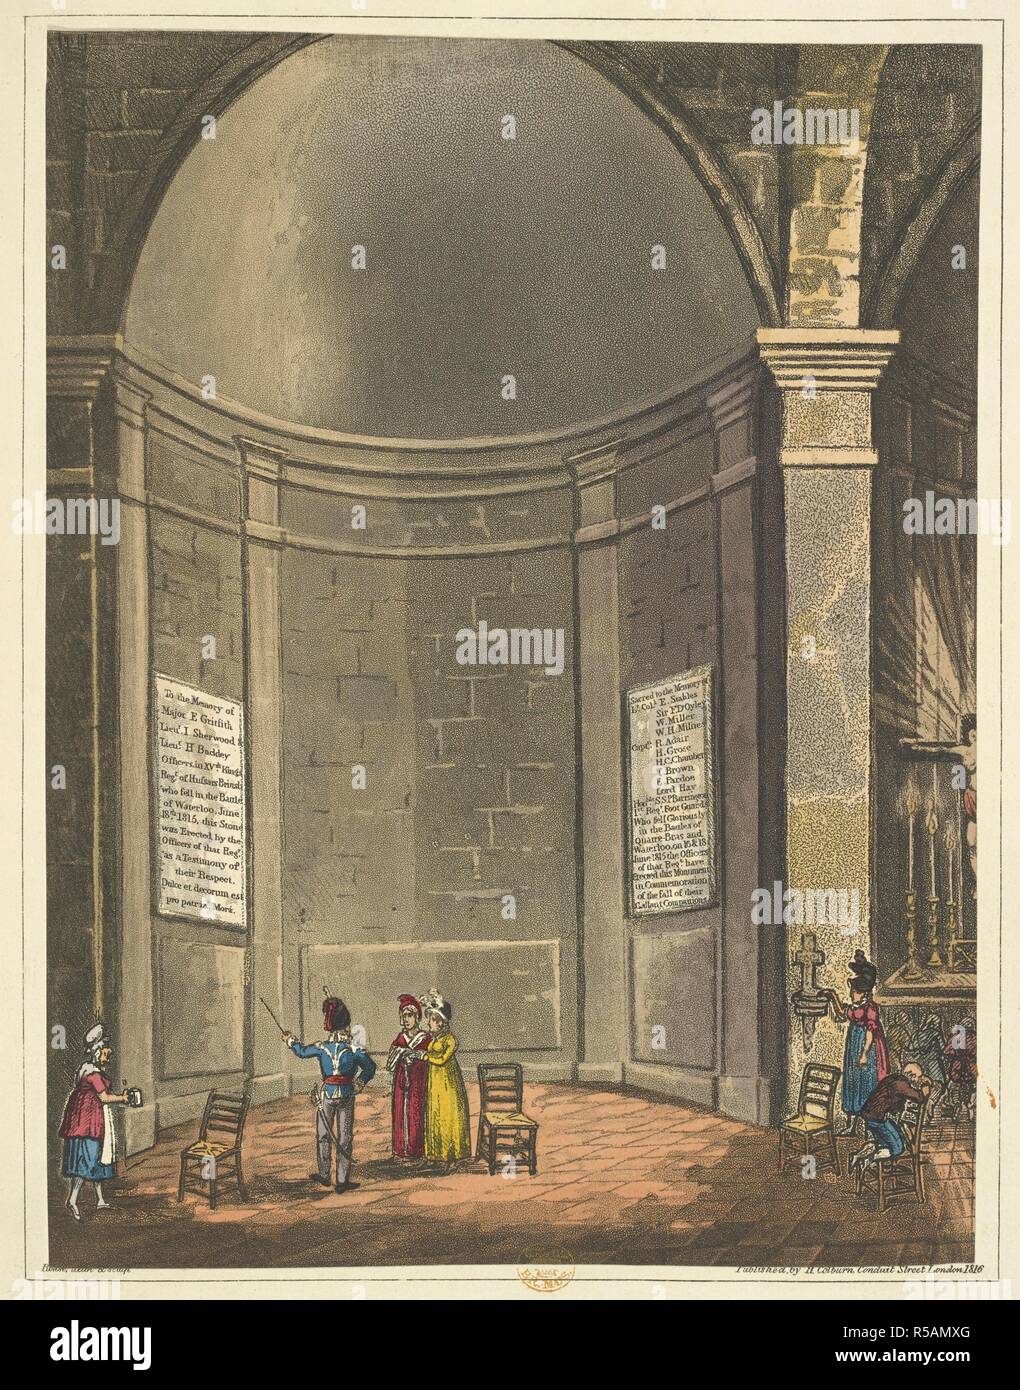 Interior of the chapel of Waterloo. An Historical Account of the Campaign in the Netherlands, in 1815, under His Grace the Duke of Wellington, and Marshal Prince Blucher, comprising the battles of Ligny, Quatrebras, and Waterloo; with a detailed narrative of the political events connected with those memorable conflicts down to the surrender of Paris, and the departure of Bonaparte for St. Helena ... Embellished with ... plates ... from drawings ... by James Rouse. London : Henry Colburn, 1817. Source: 193.e.9 Plate V - D.D. Author: JAMES ROUSE. Mudford, William. Stock Photo